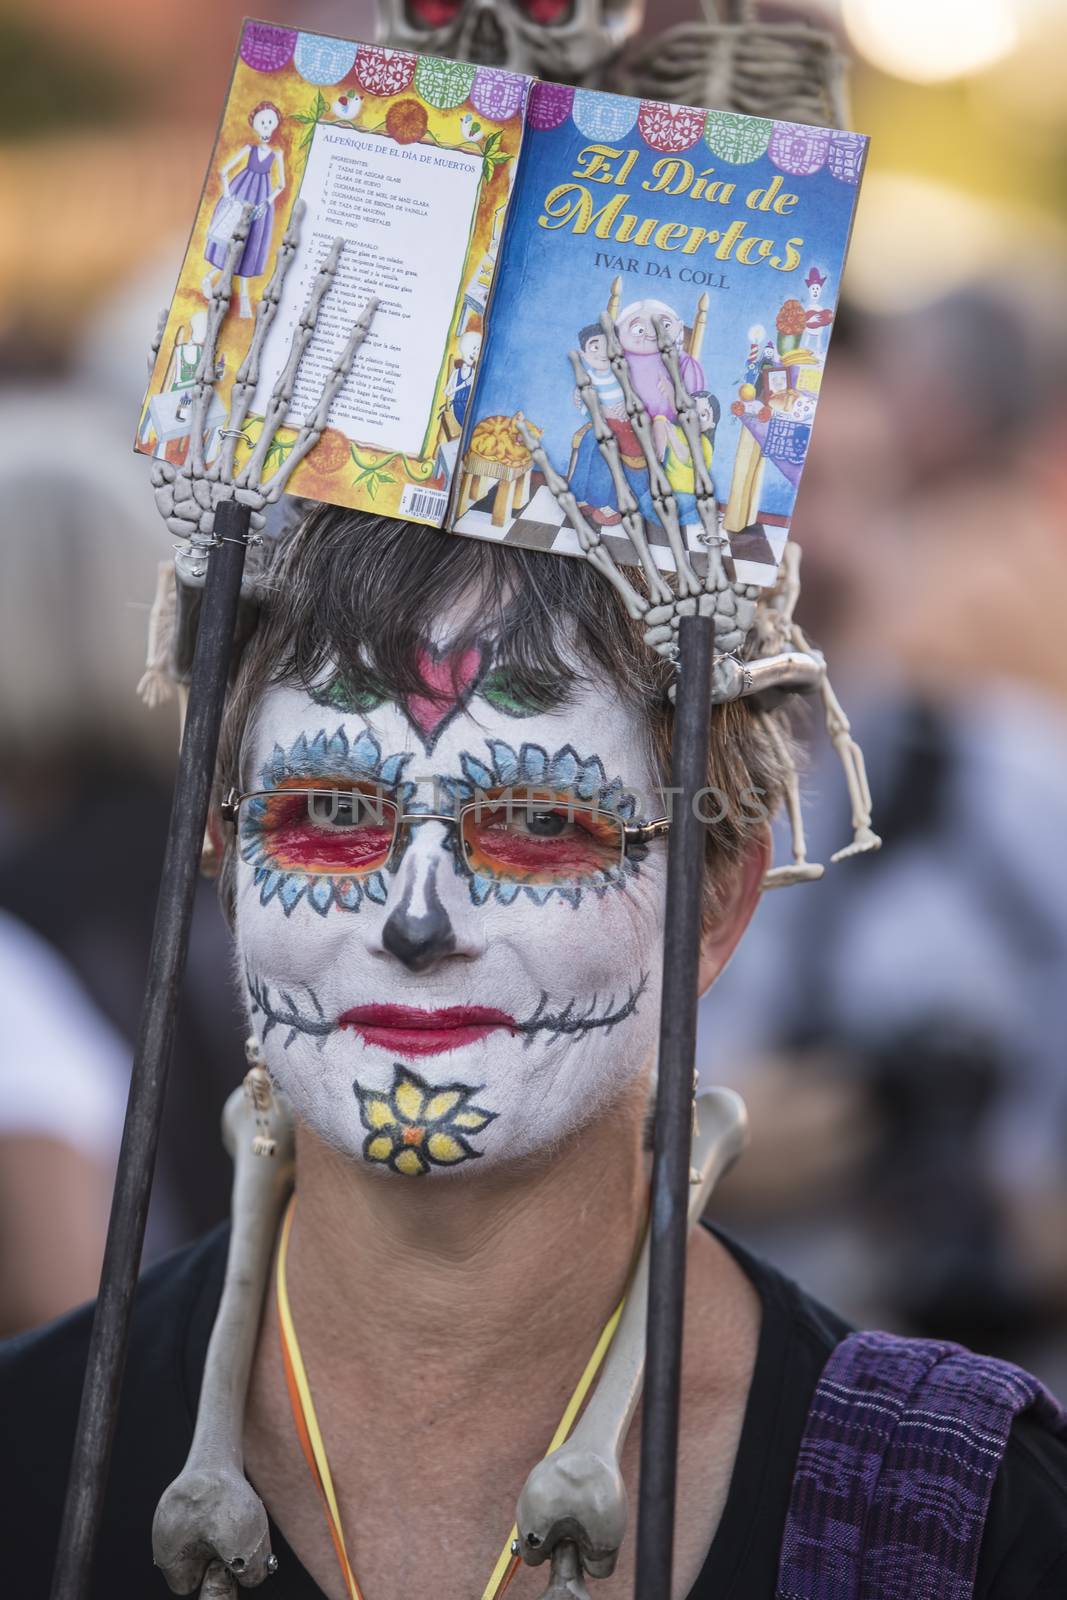 TUCSON, AZ/USA - NOVEMBER 09: Unidentified woman in facepaint at the All Souls Procession on November 09, 2014 in Tucson, AZ, USA.